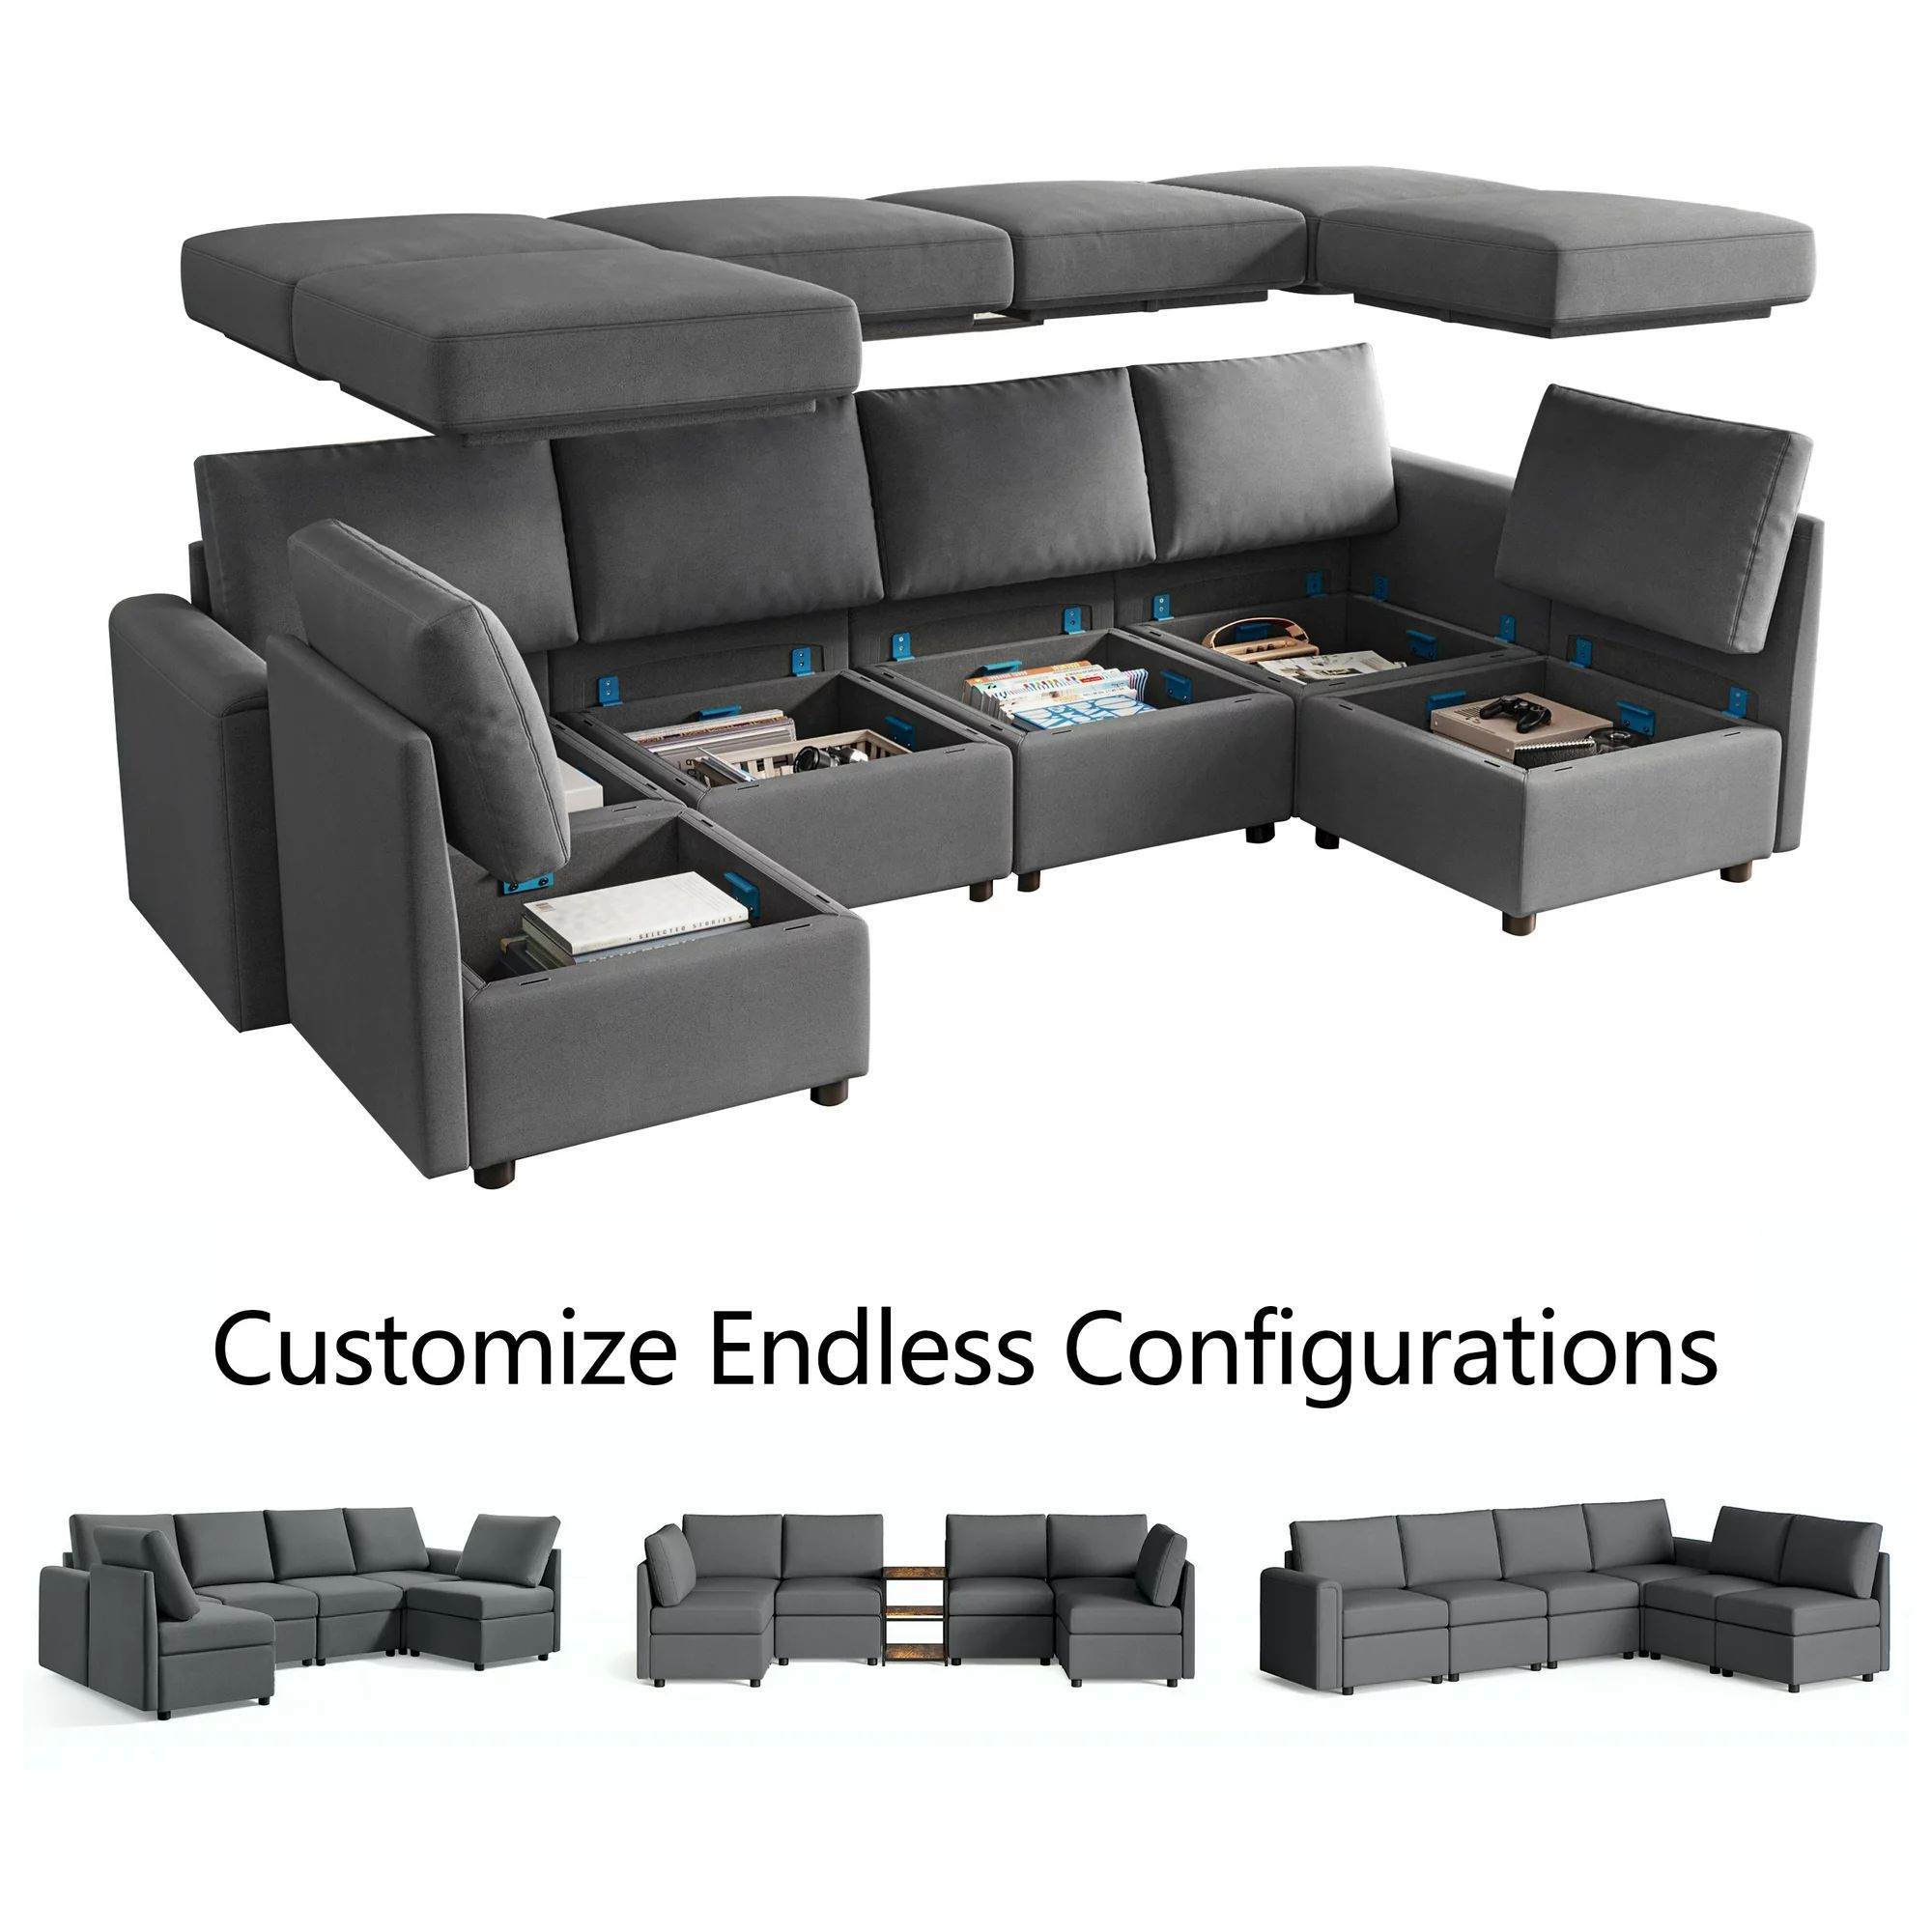 LINSY HOME Modular Couches and Sofas Sectional with Storage Sectional Sofa U Shaped Sectional Cou... | Walmart (US)